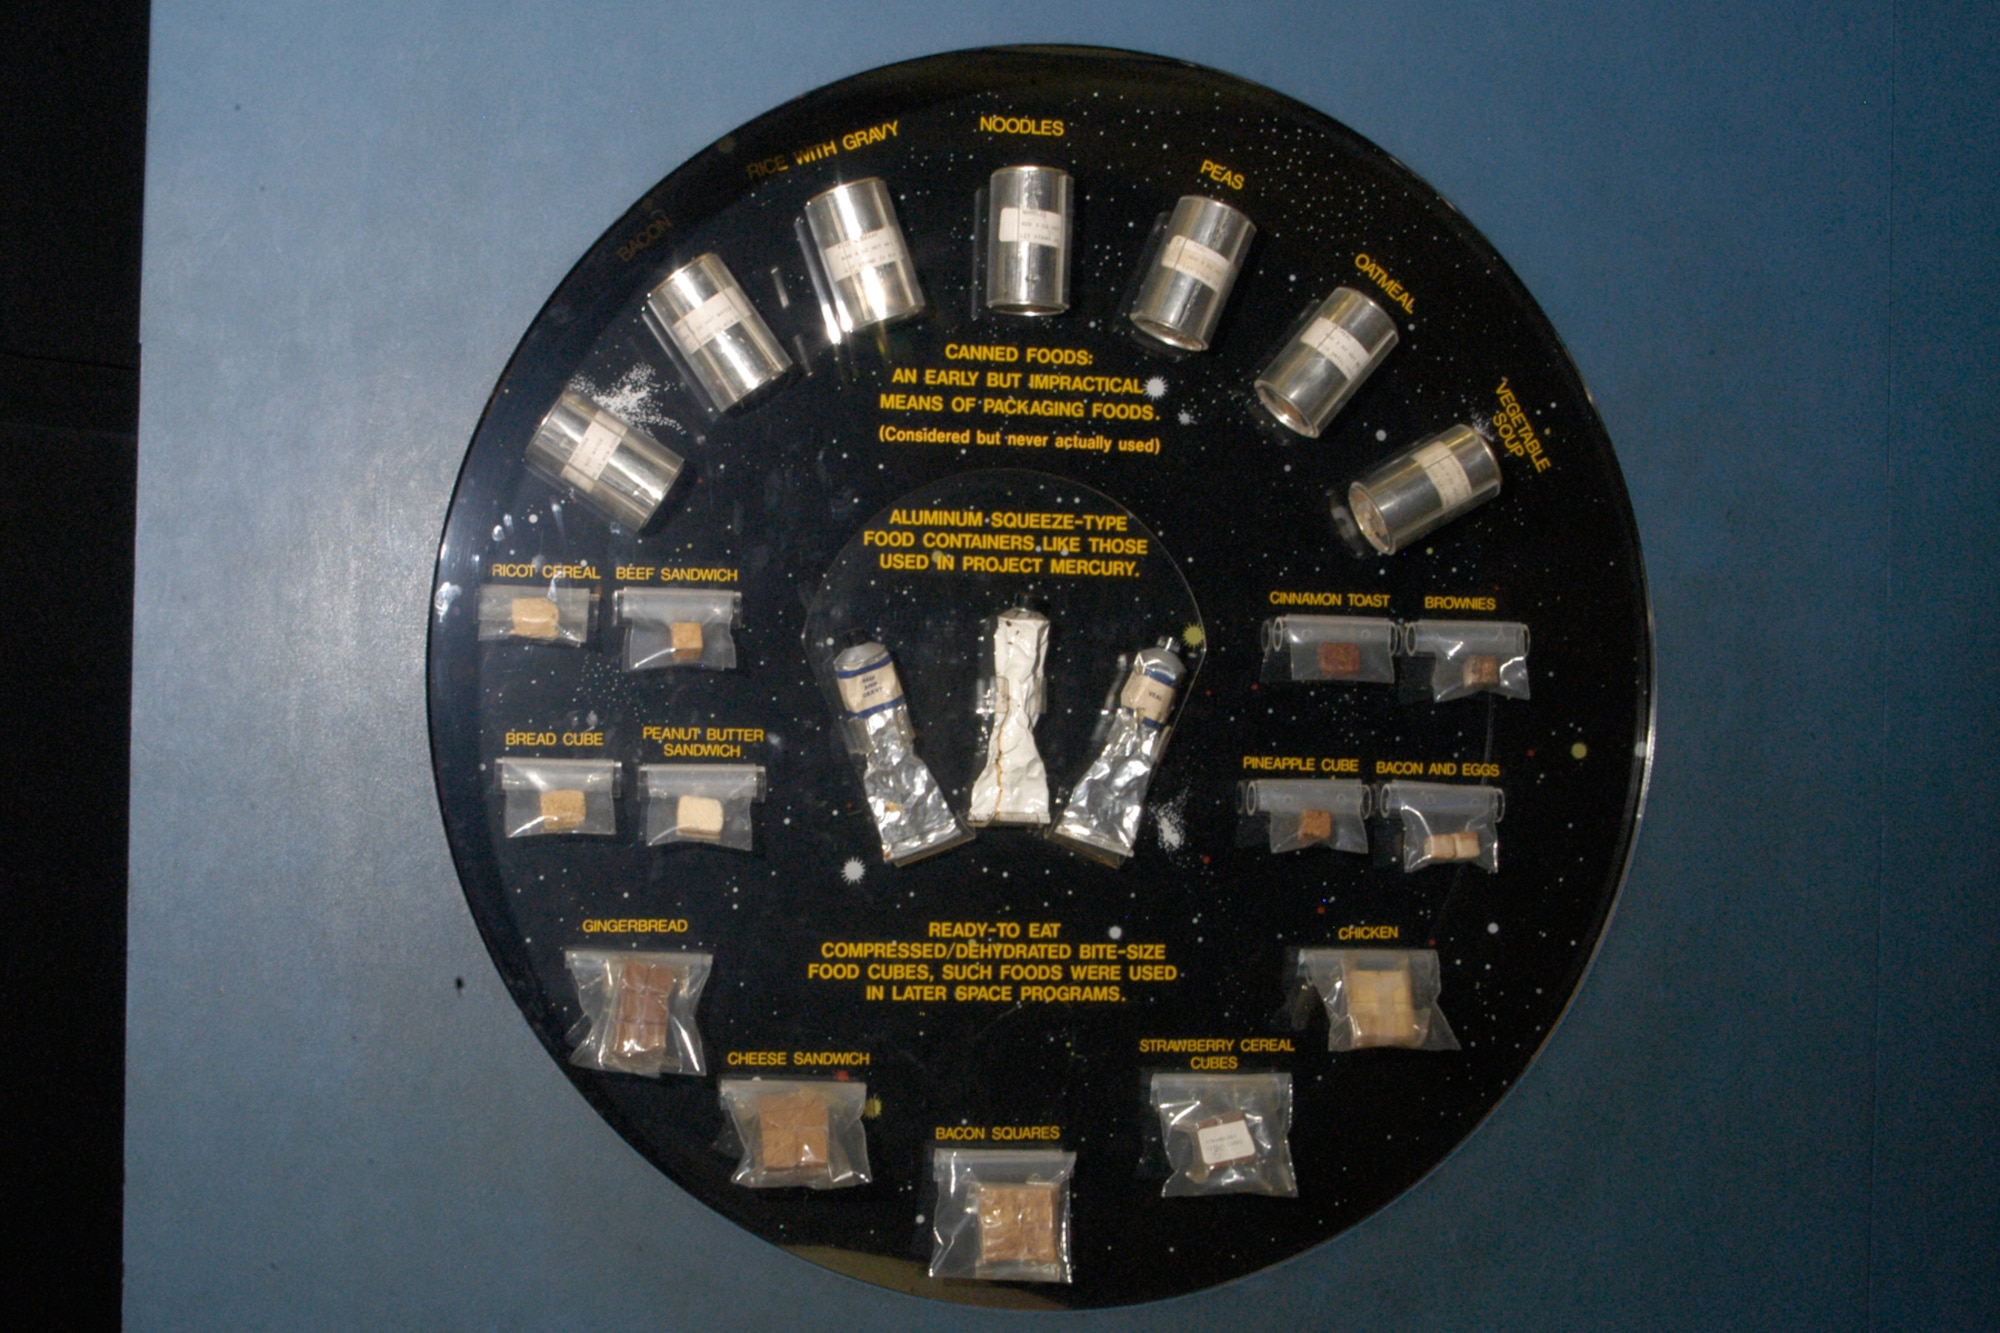 Space Foods exhibit in the Missile and Space Gallery at the National Museum of the United States Air Force. (U.S. Air Force photo) 